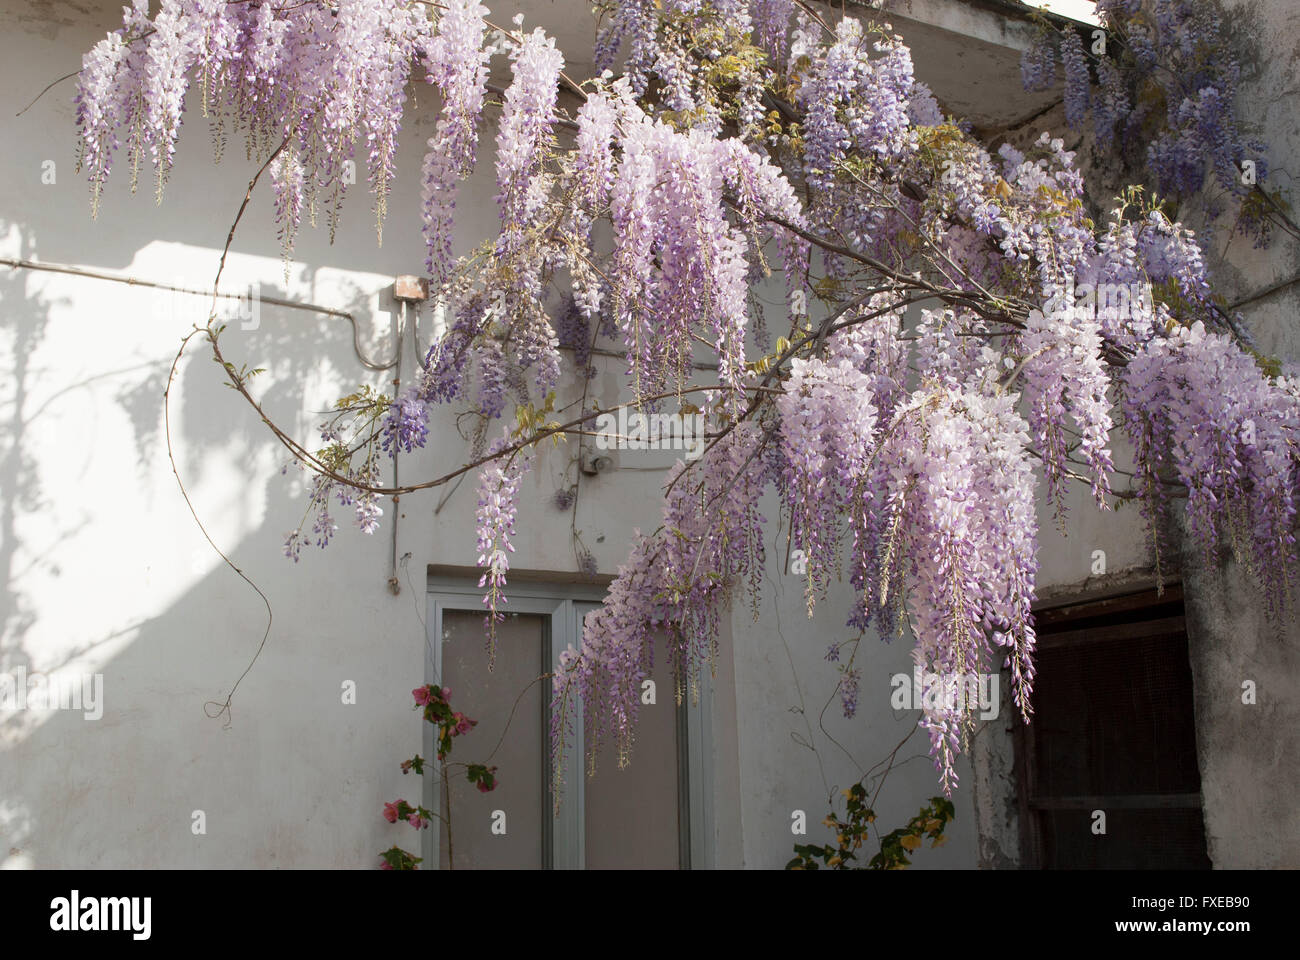 Wisteria Plant in an Old Courtyard With Other Flowers Stock Photo